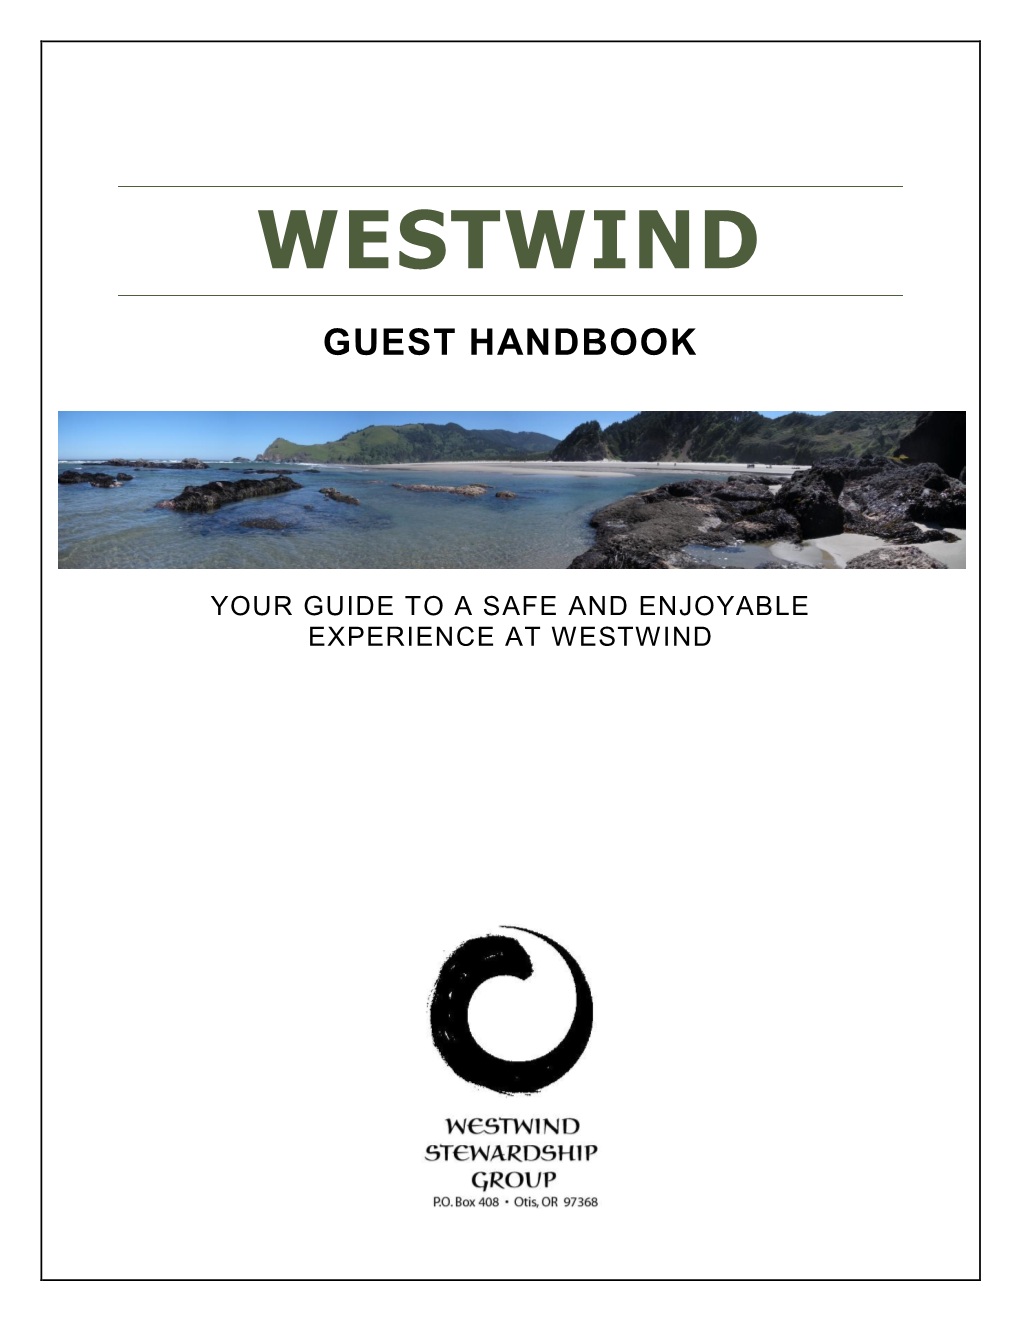 Camp Westwind Allow up to 145 People to Experience Isolation and a Deep Connection with Nature